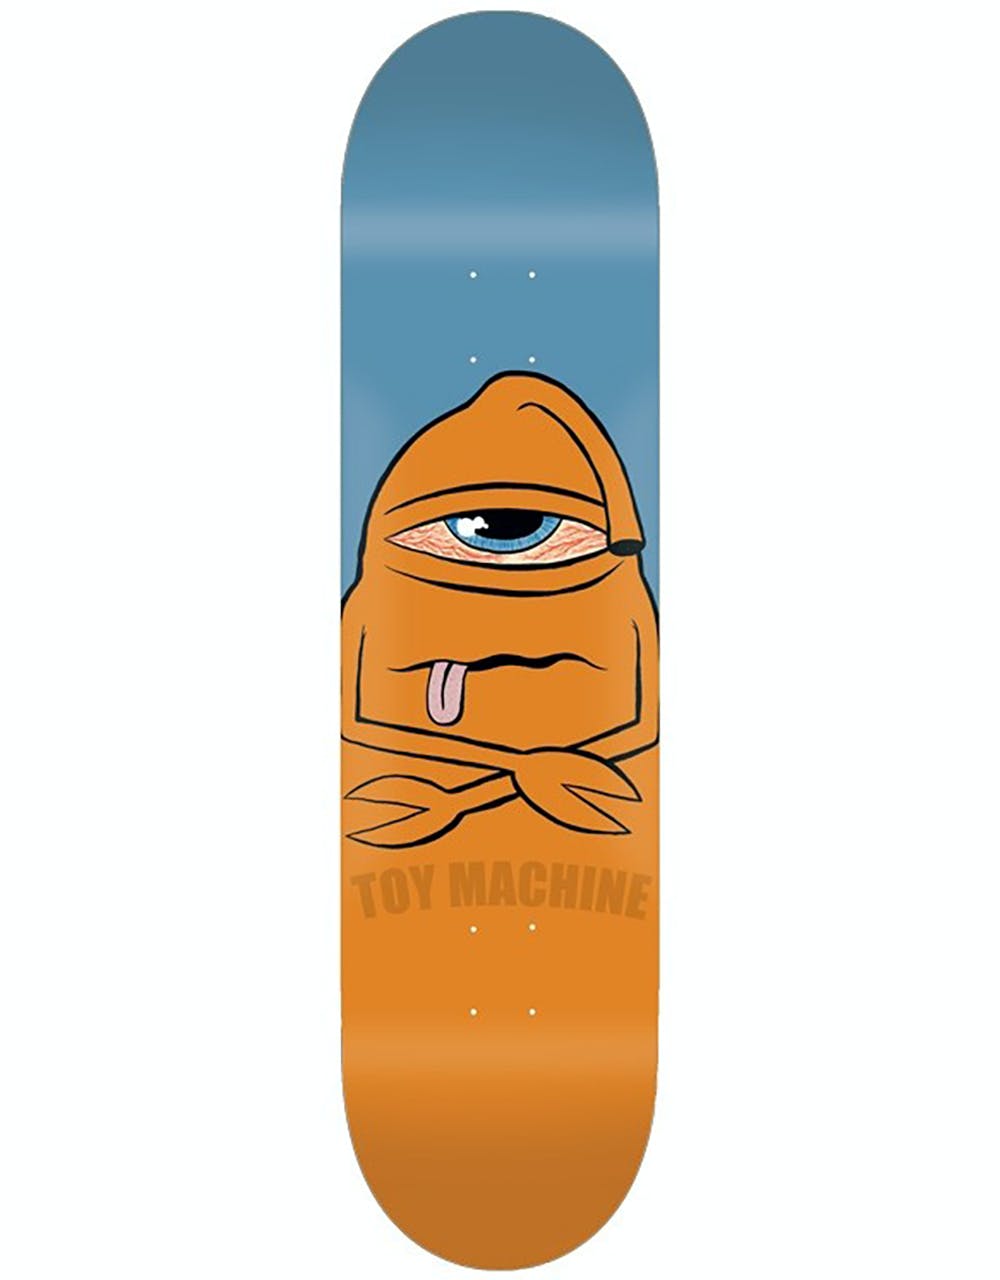 Toy Machine Bored Sect Skateboard Deck - 8.25"